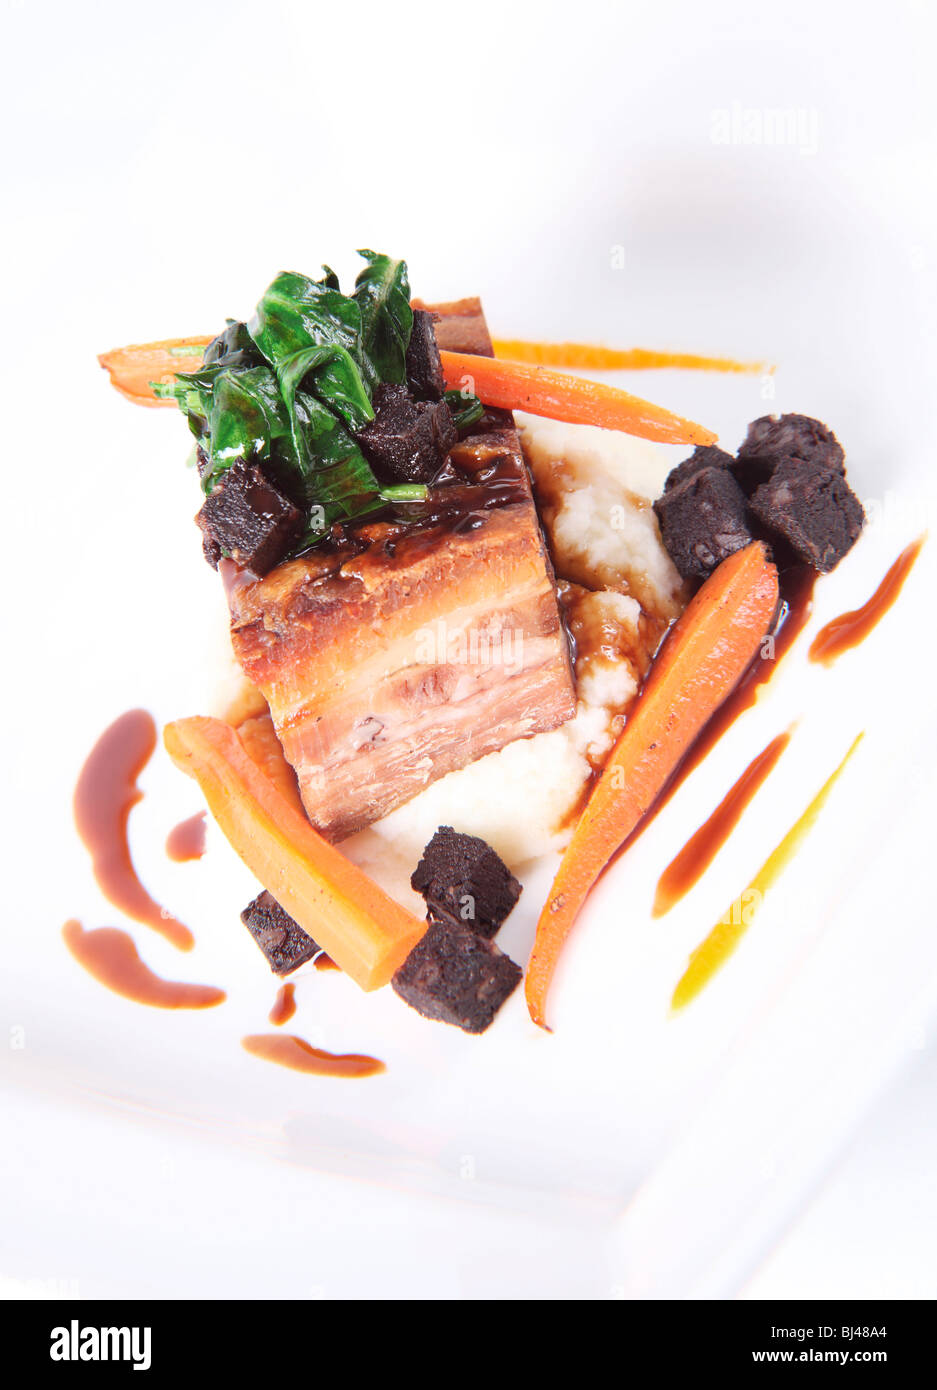 Roasted Belly of Pork with Black Pudding and Bacon Mash Stock Photo